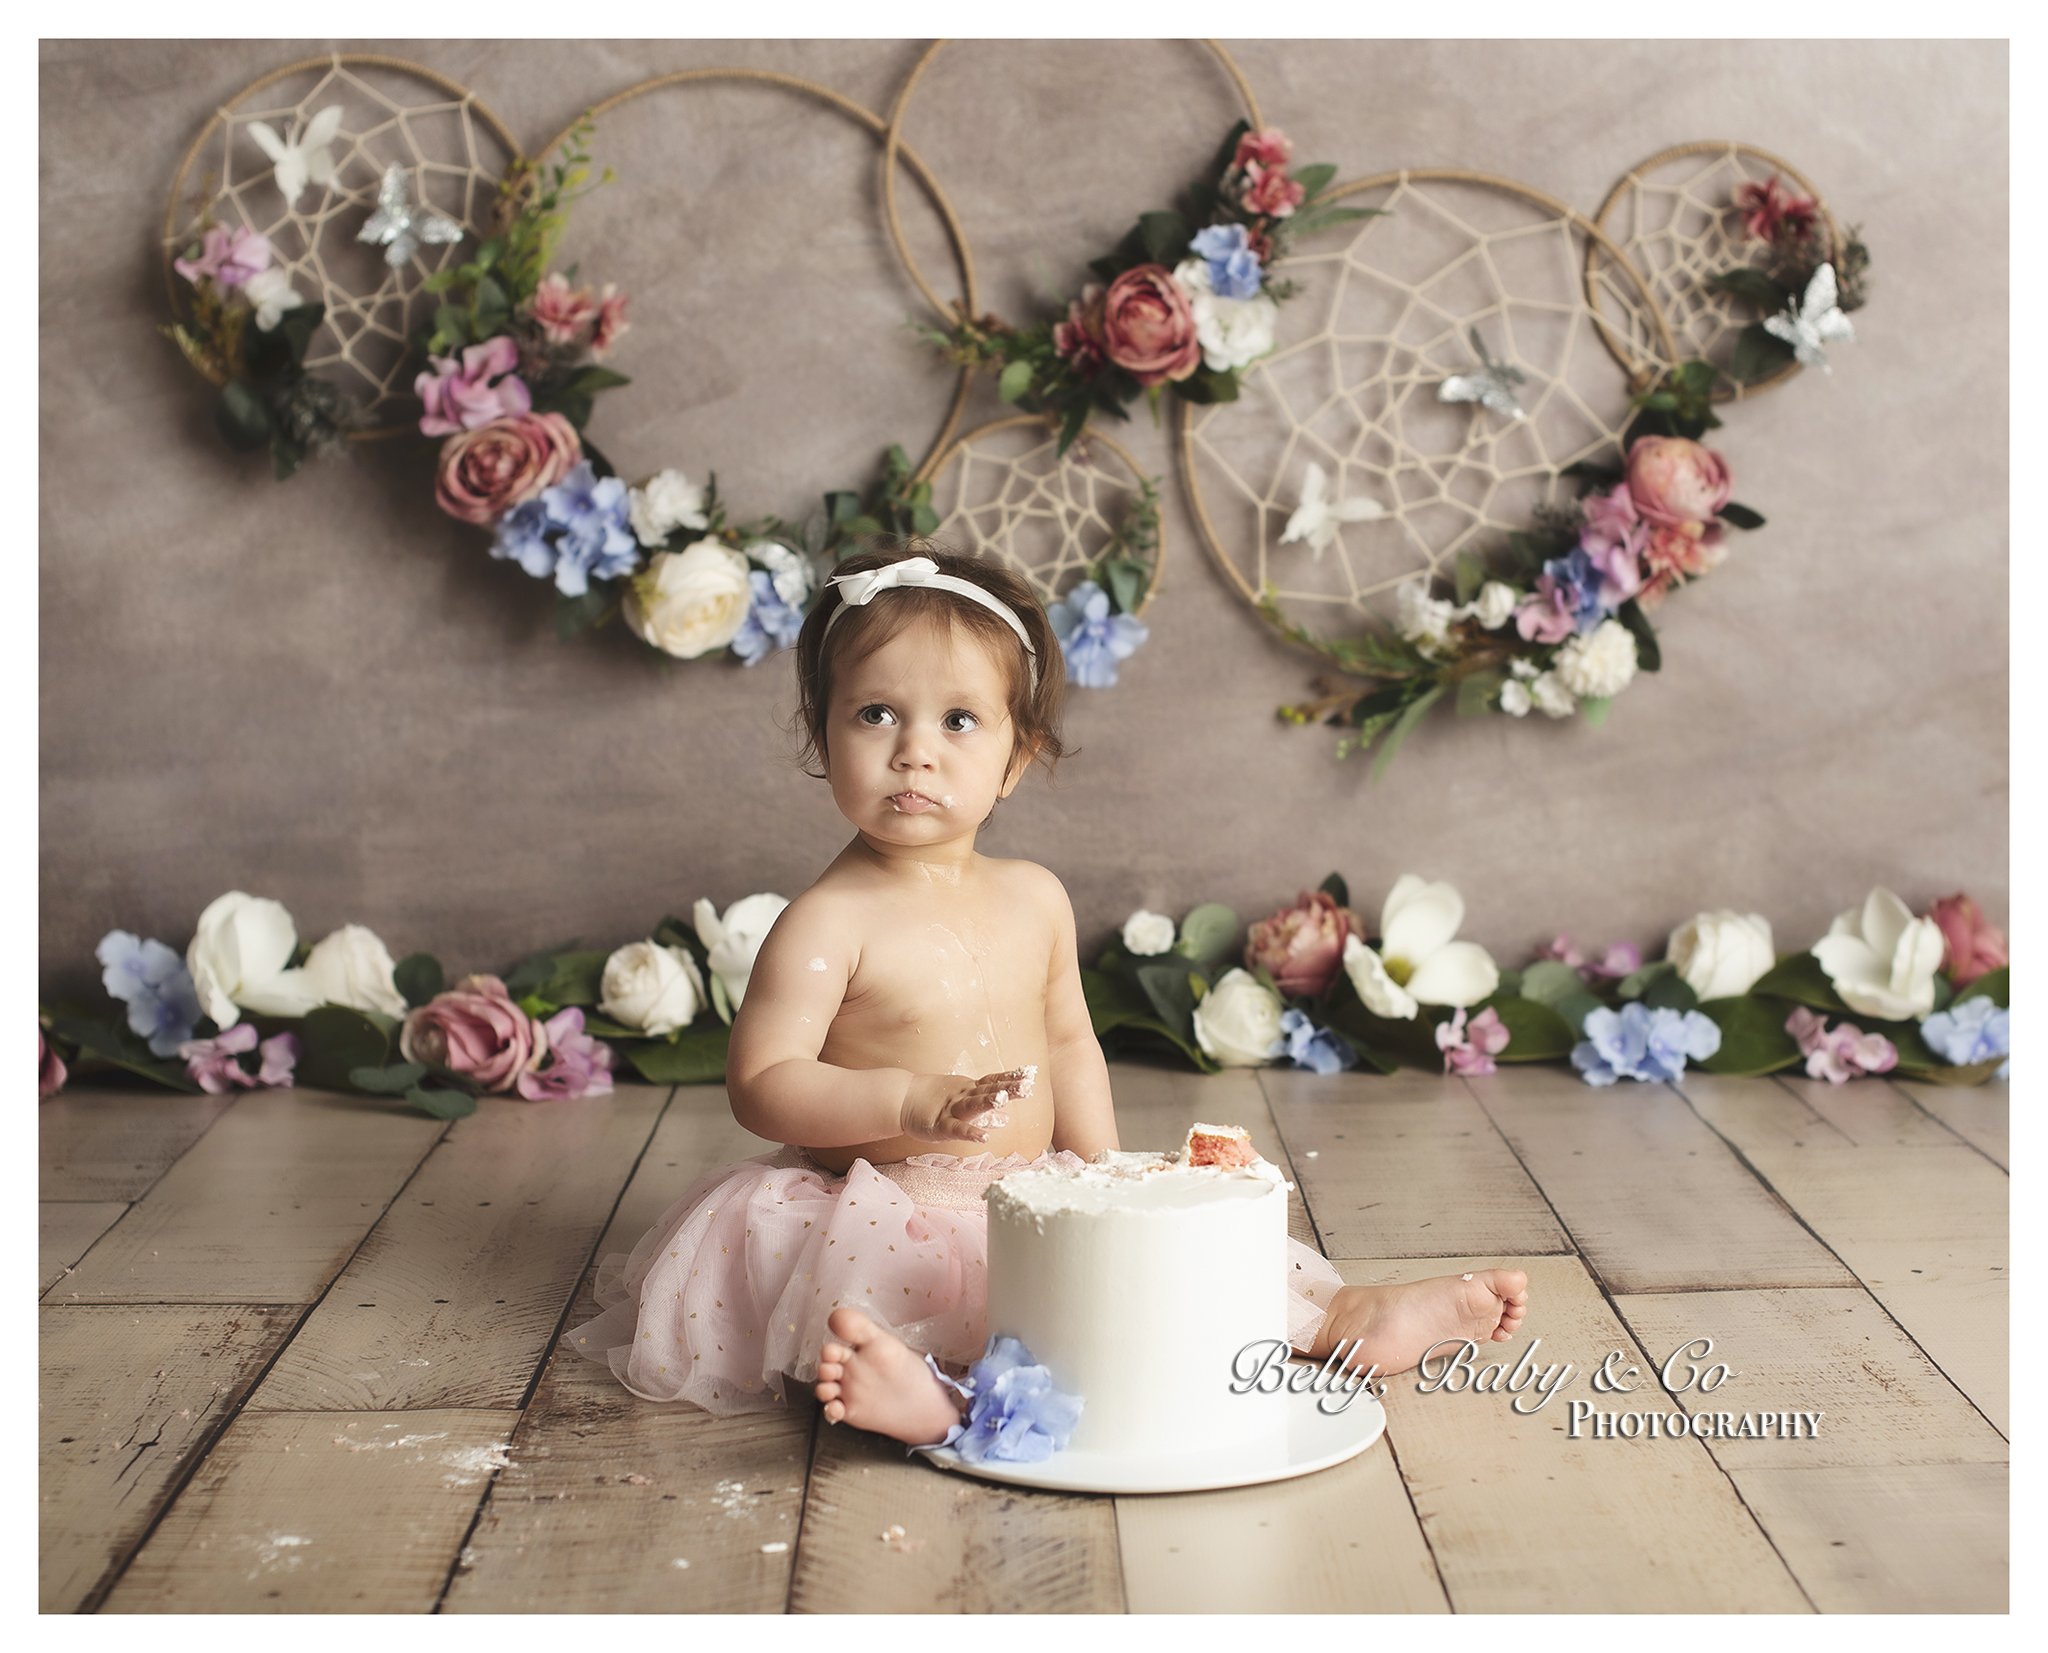 Belly-Baby-Co-Photography-3 Top 10 Best Cake Smash Photographers in the World